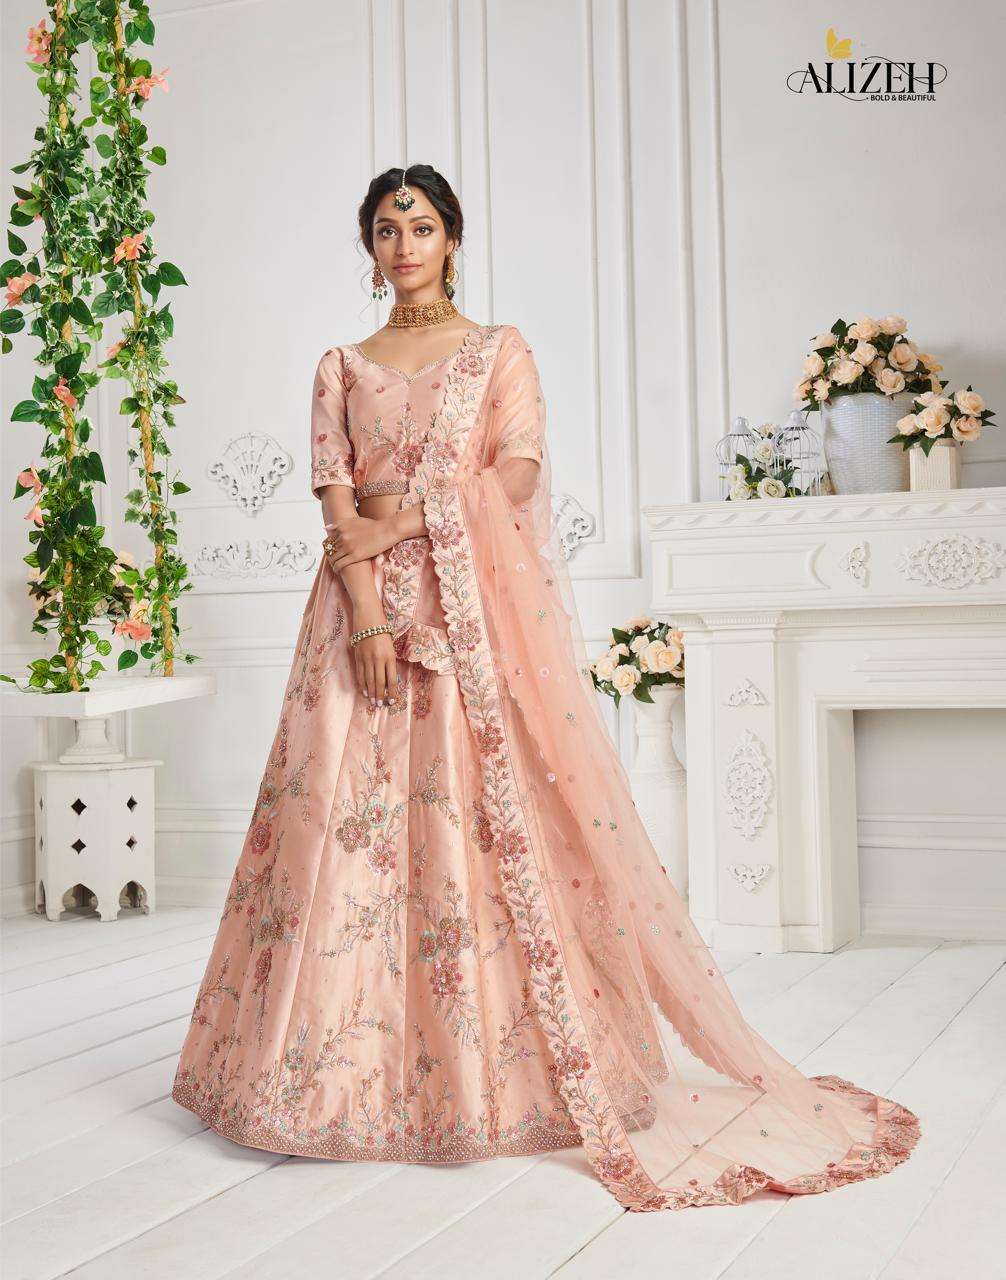 Milan Design - ~ROOH~ Statement bridal ensembles by @milandesignkochi and  #madebymilan! A scintillating mermaid lehenga adorned with exquisite pink  embroidery with a tinge of rainbow tone, a timeless reception design apt for